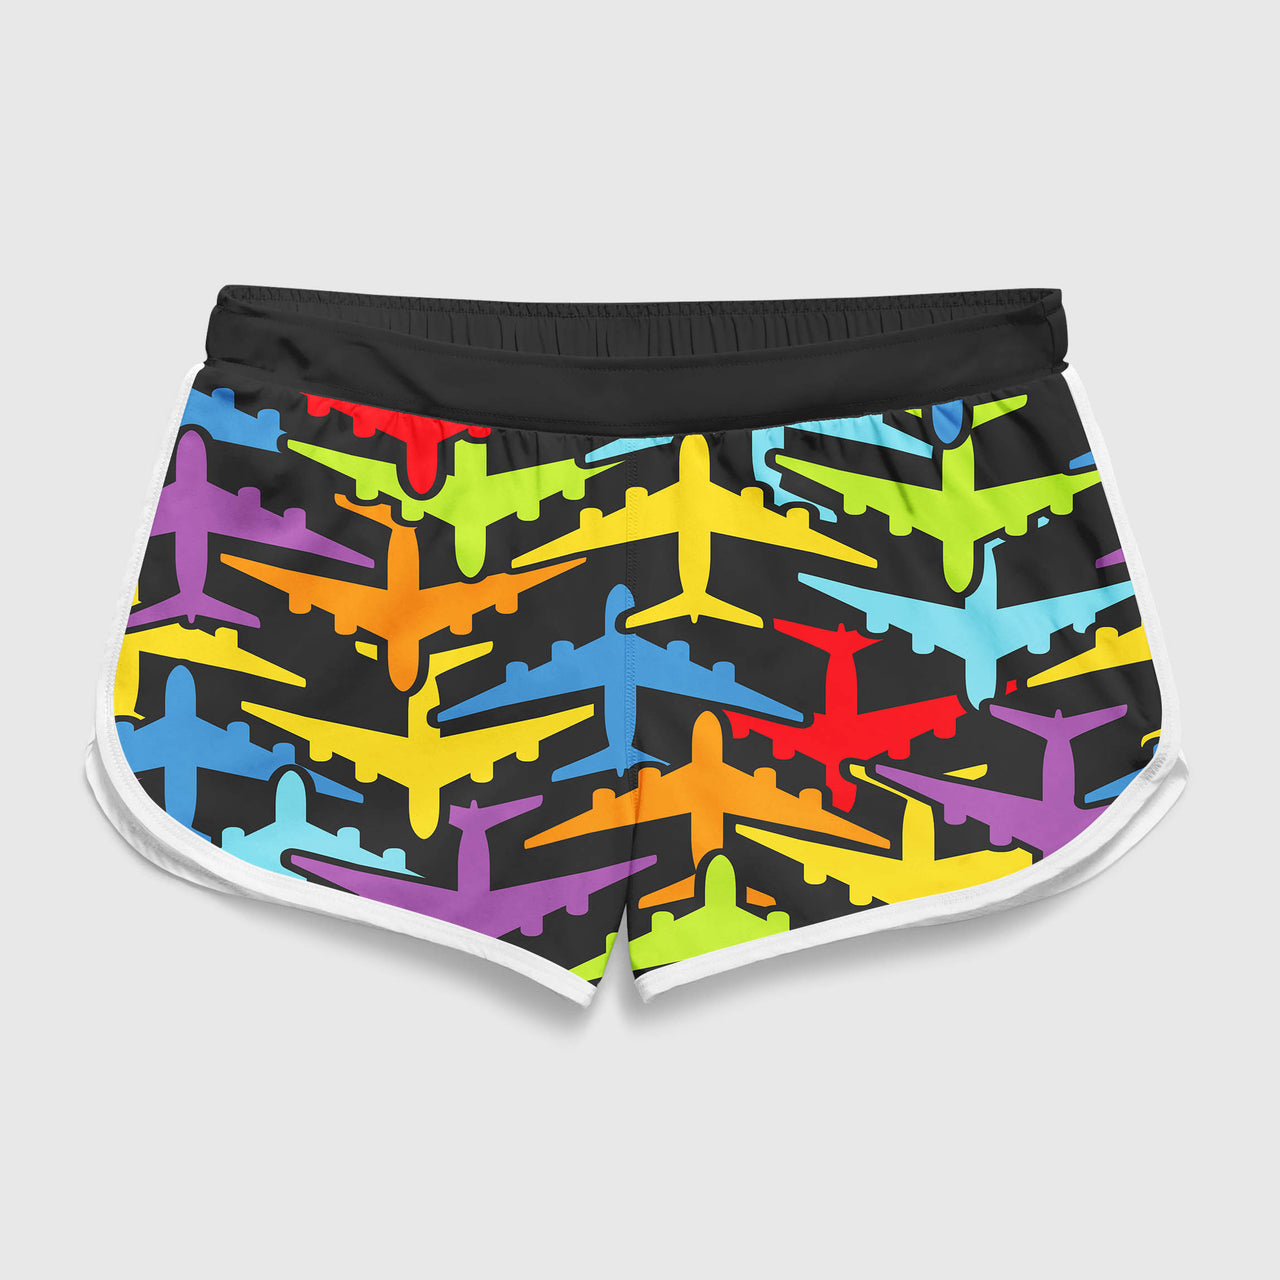 Super Colourful Airplanes Designed Women Beach Style Shorts